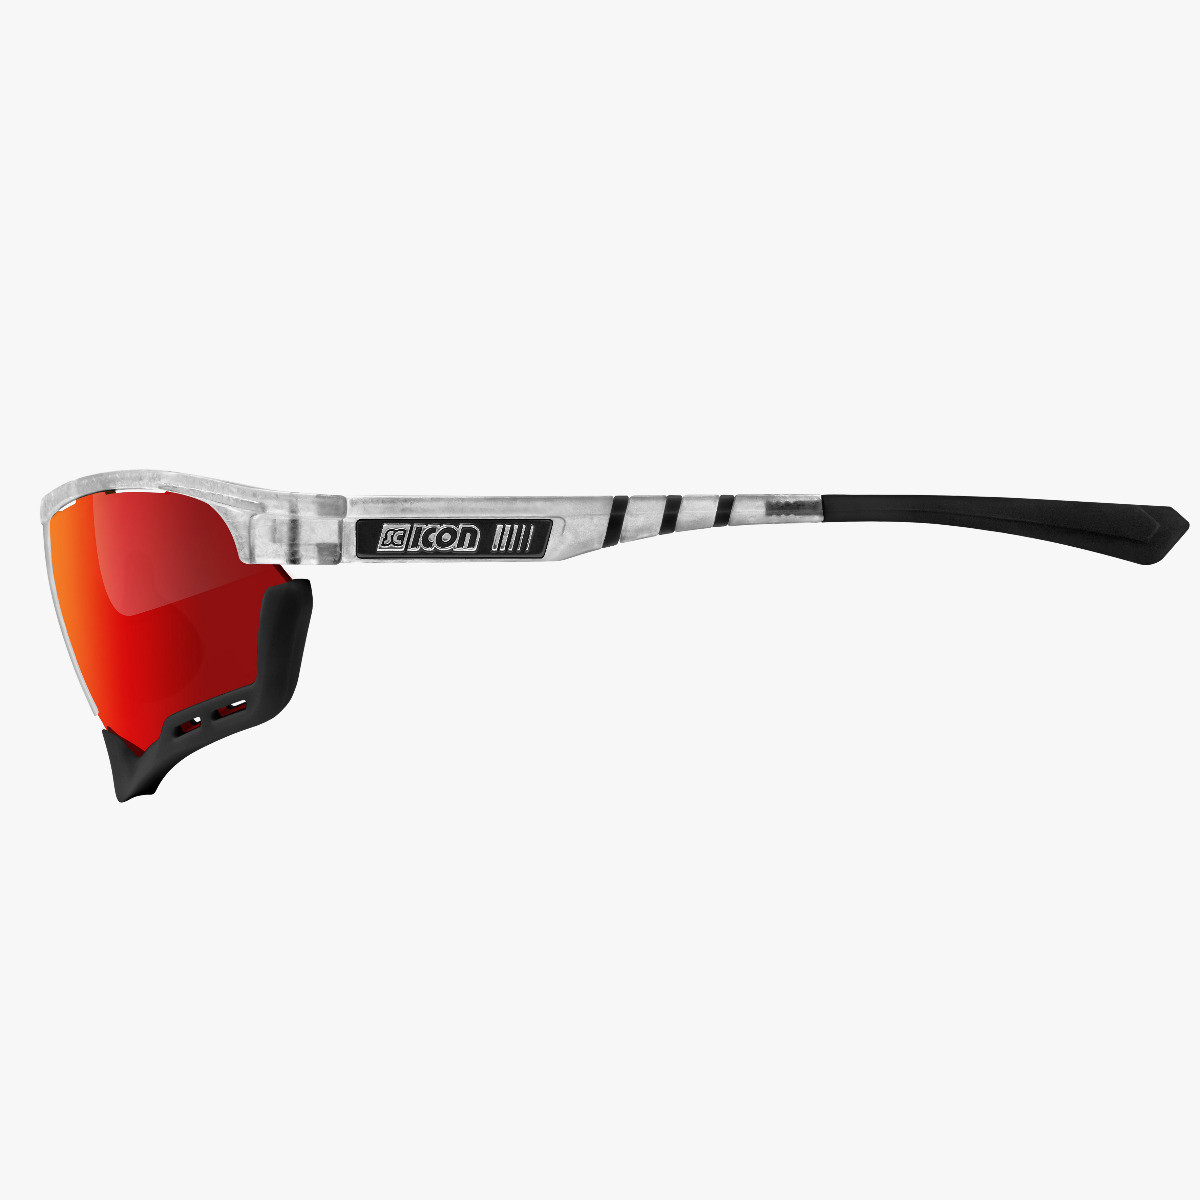 Scicon Sports | Aerocomfort Sport Cycling Performance Sunglasses - Frozen White / Red - EY15060503
